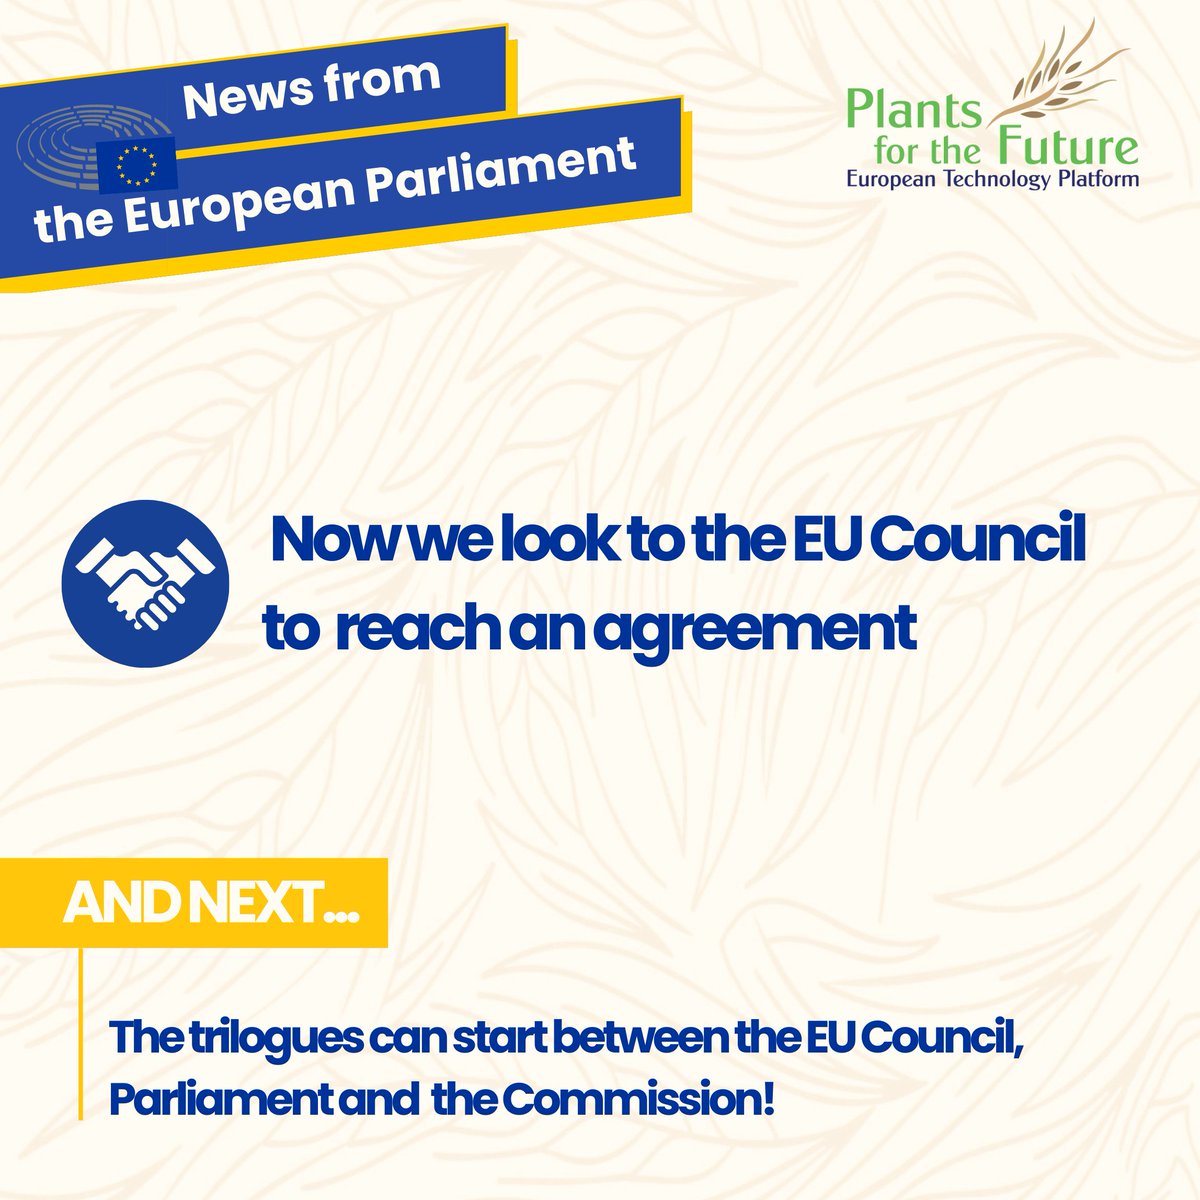 📣The #EuropeanParliament has approved the legislative proposal for the regulation of #NGTs!

Now we look to the European Council whom we hope will reach their own agreement soon, so trilogues can start.

This is just the beginning, but it marks an important milestone!🌿